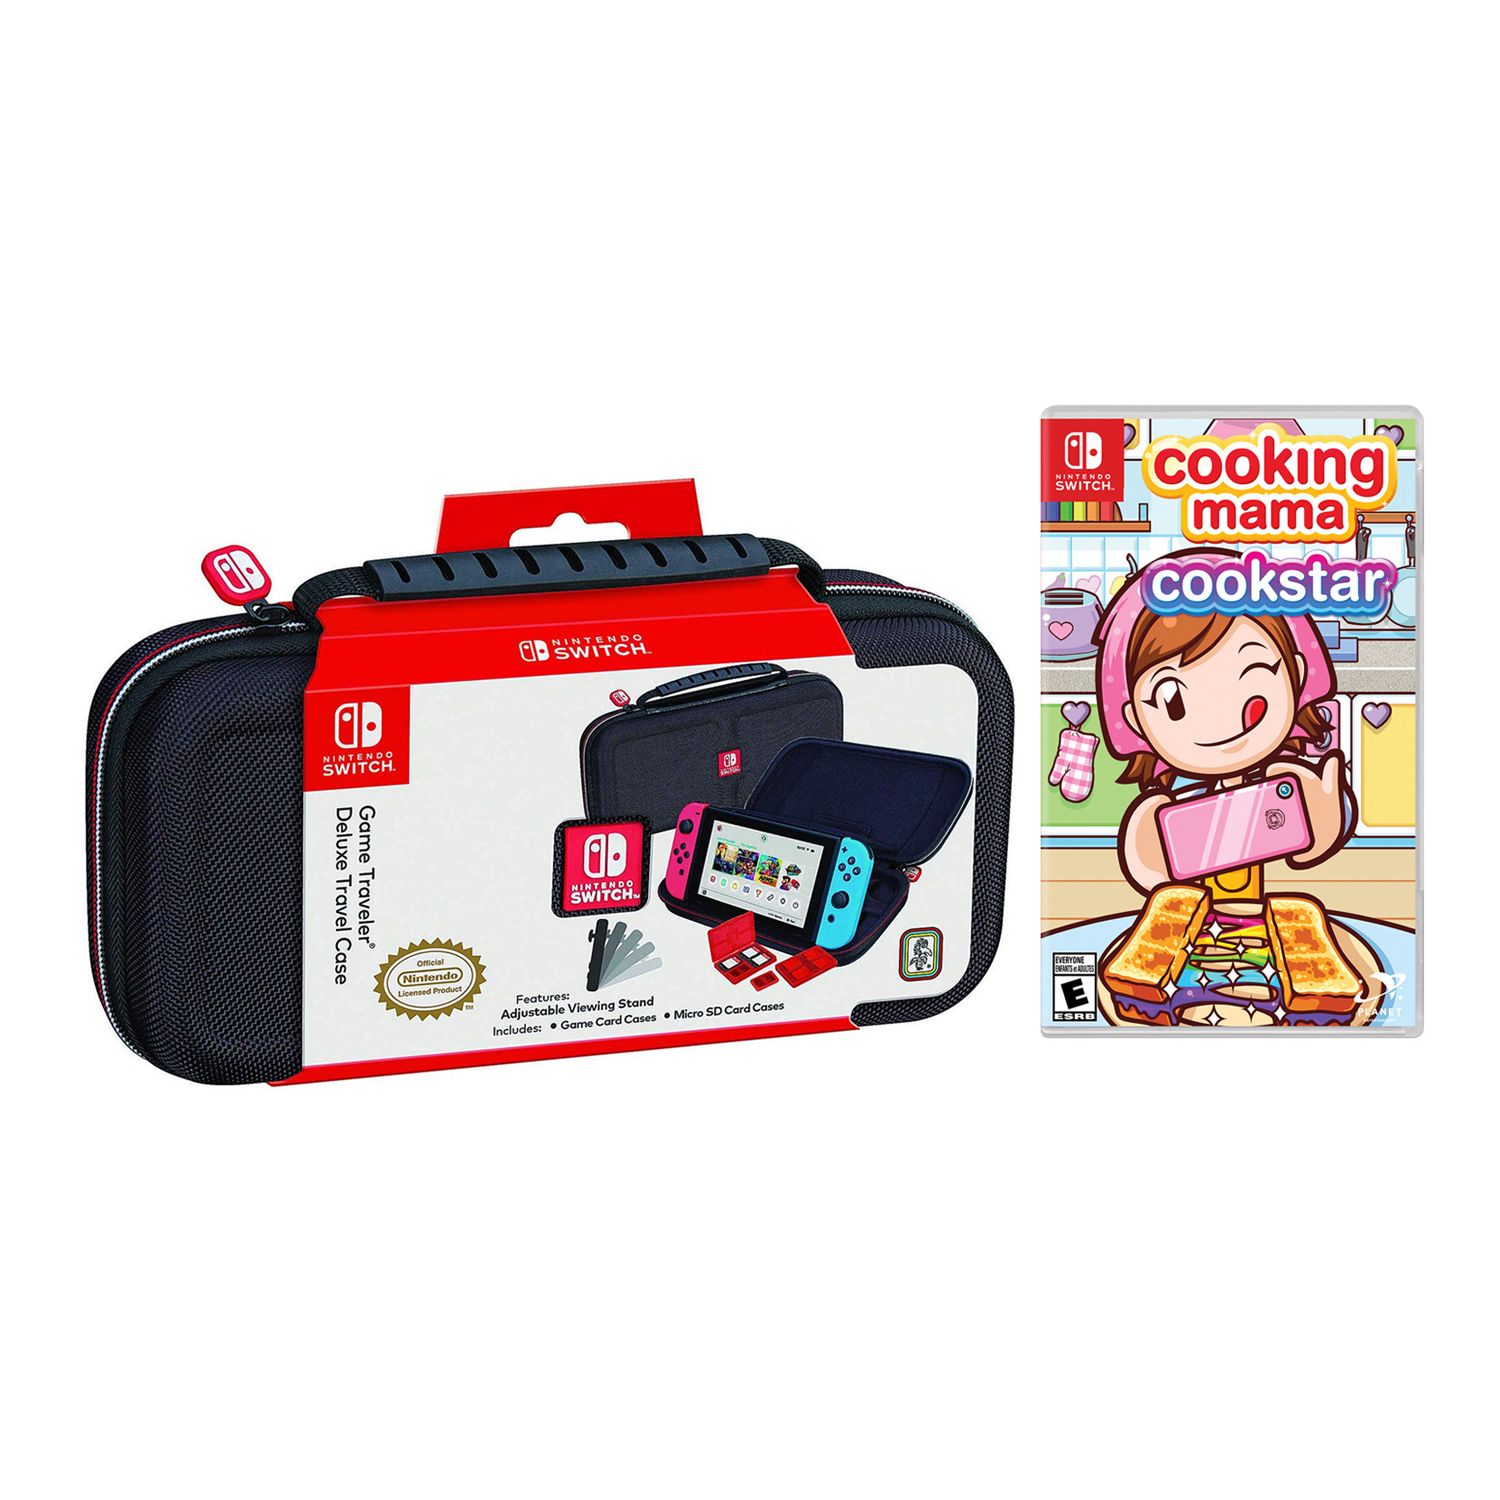 cooking mama on nintendo switch